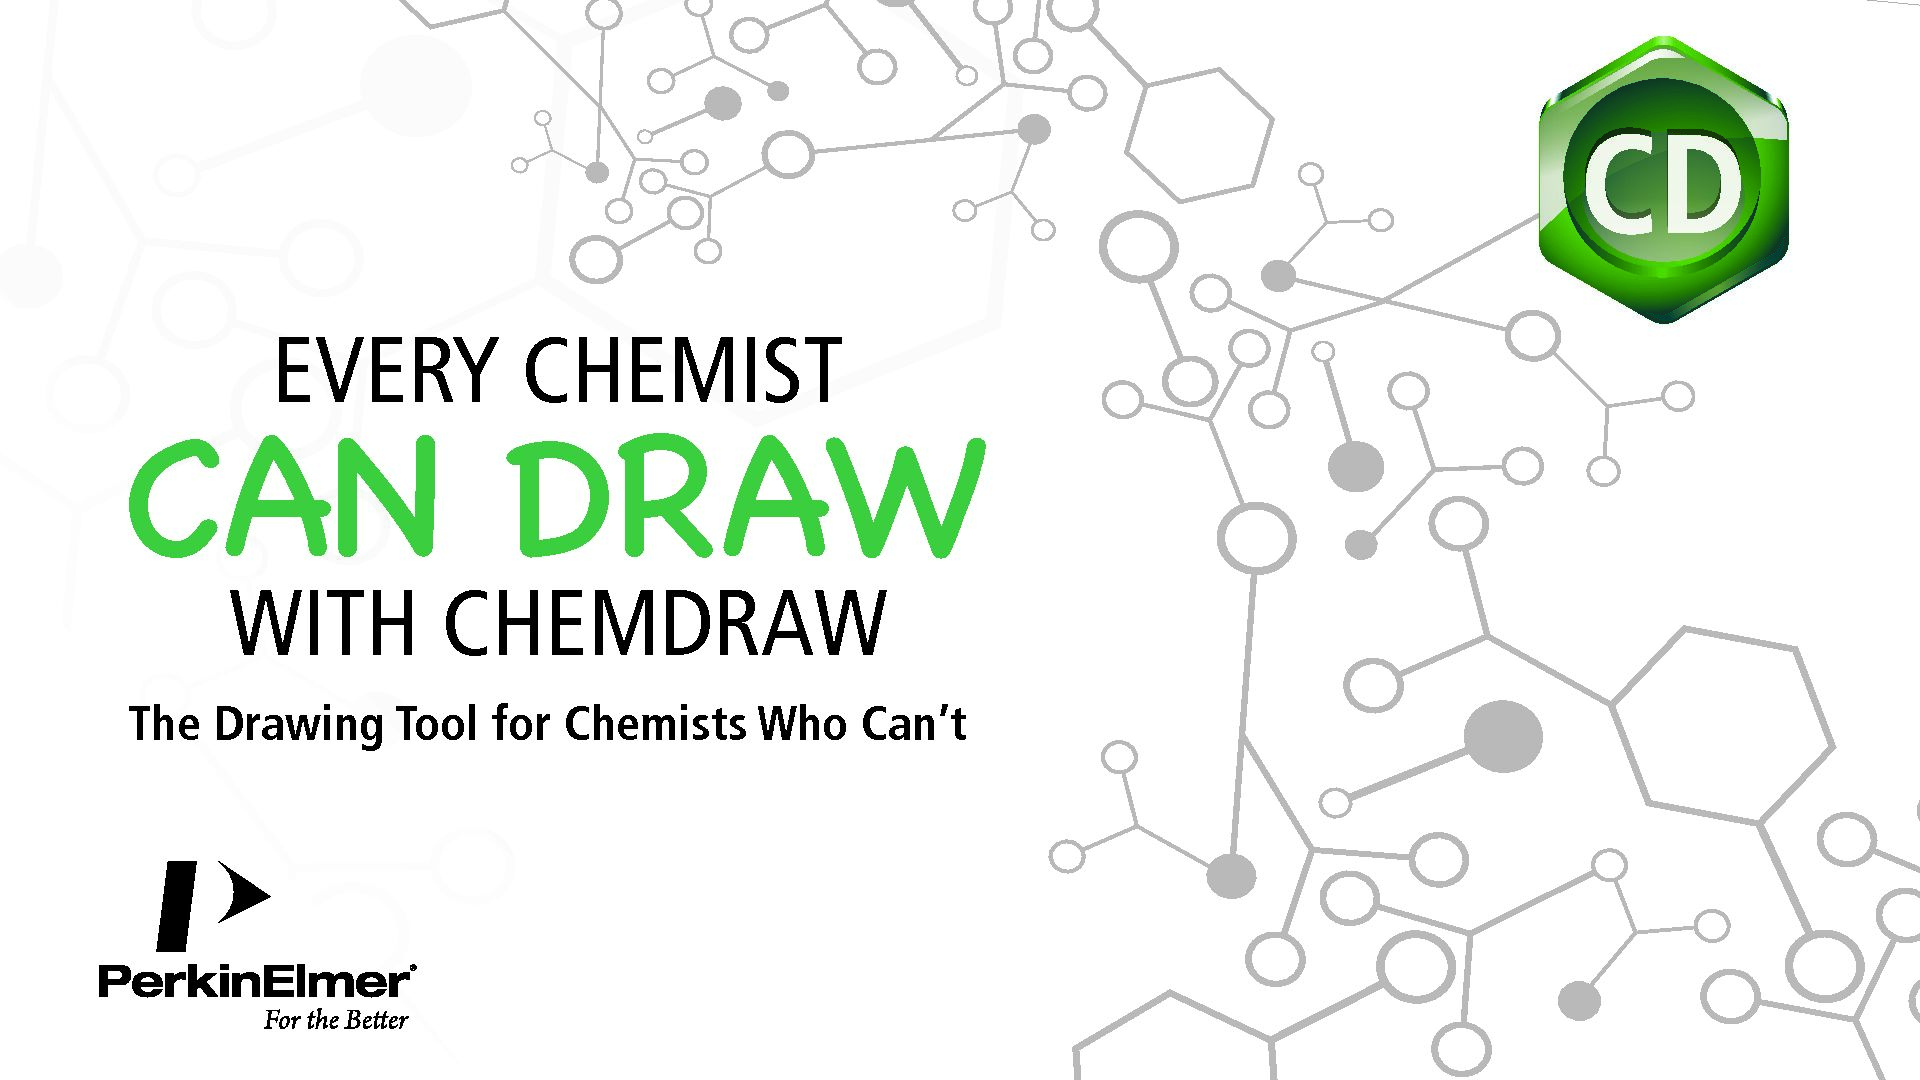 [PDF] The Drawing Tool for Chemists Who Cant - PerkinElmer